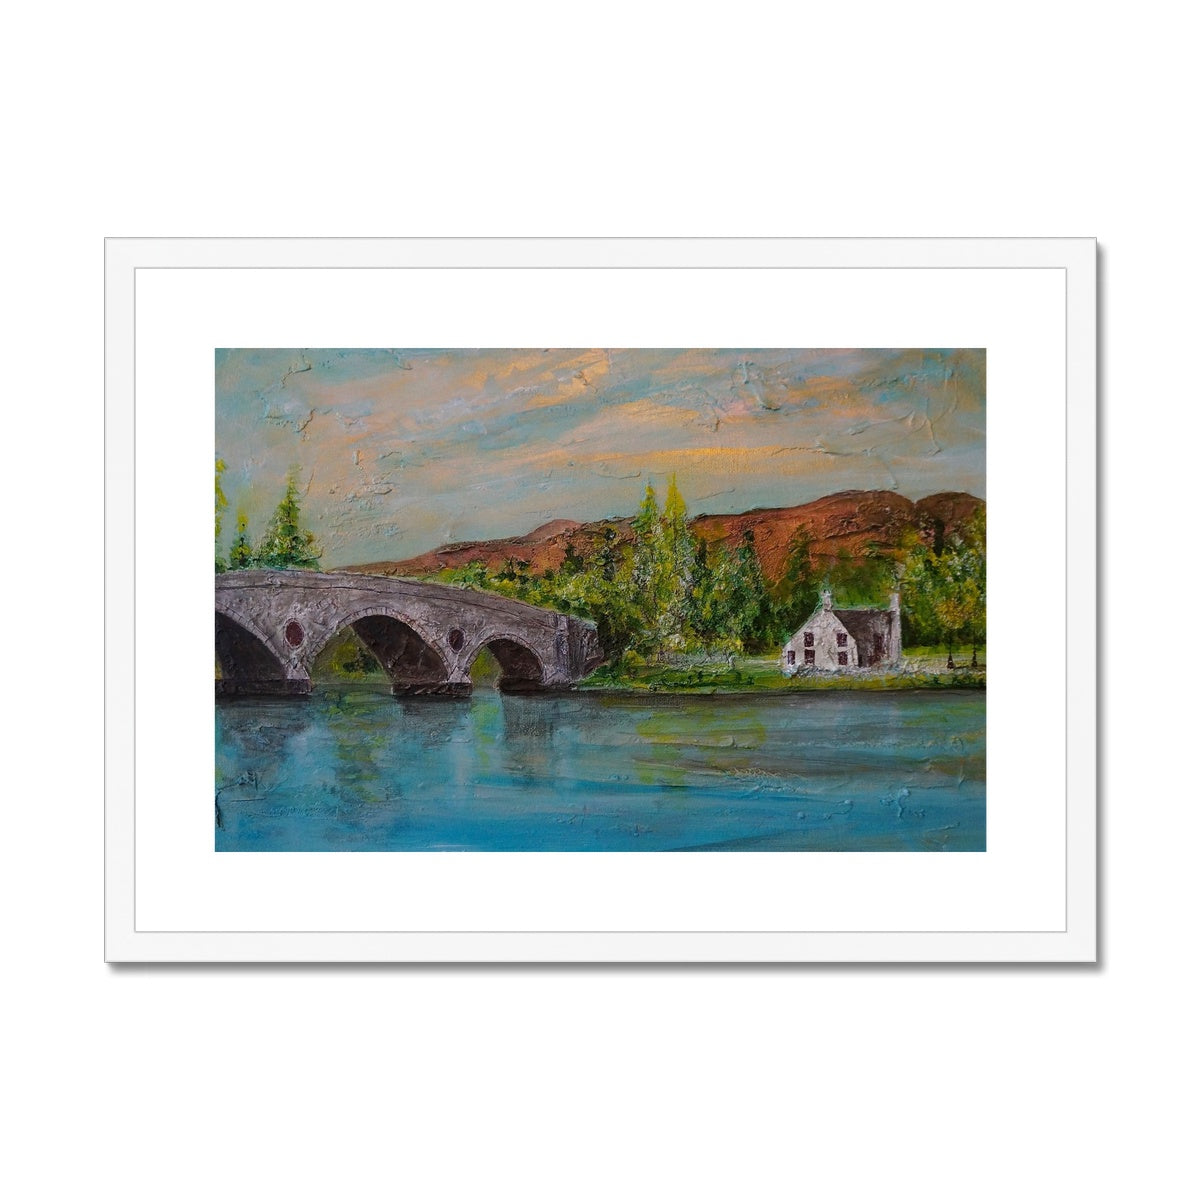 Kenmore Bridge ii Painting | Framed & Mounted Prints From Scotland-Framed & Mounted Prints-Scottish Highlands & Lowlands Art Gallery-A2 Landscape-White Frame-Paintings, Prints, Homeware, Art Gifts From Scotland By Scottish Artist Kevin Hunter